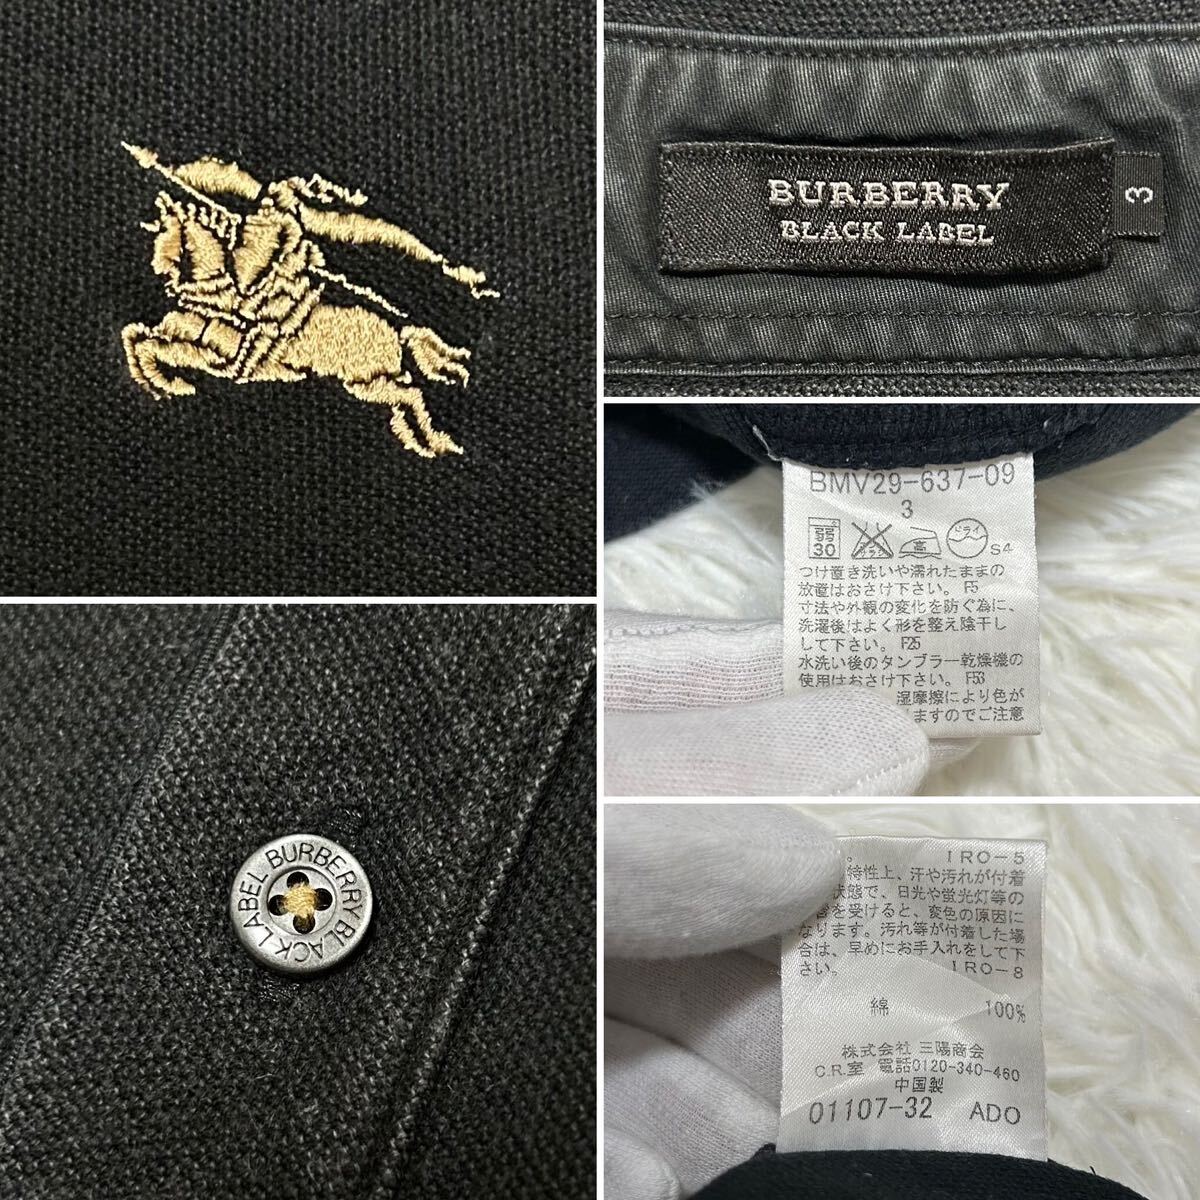 3 pieces set /L size * Burberry Black Label hose embroidery short sleeves plume polo-shirt noba check black white 3 spring summer BURBERRY BLACK LABEL